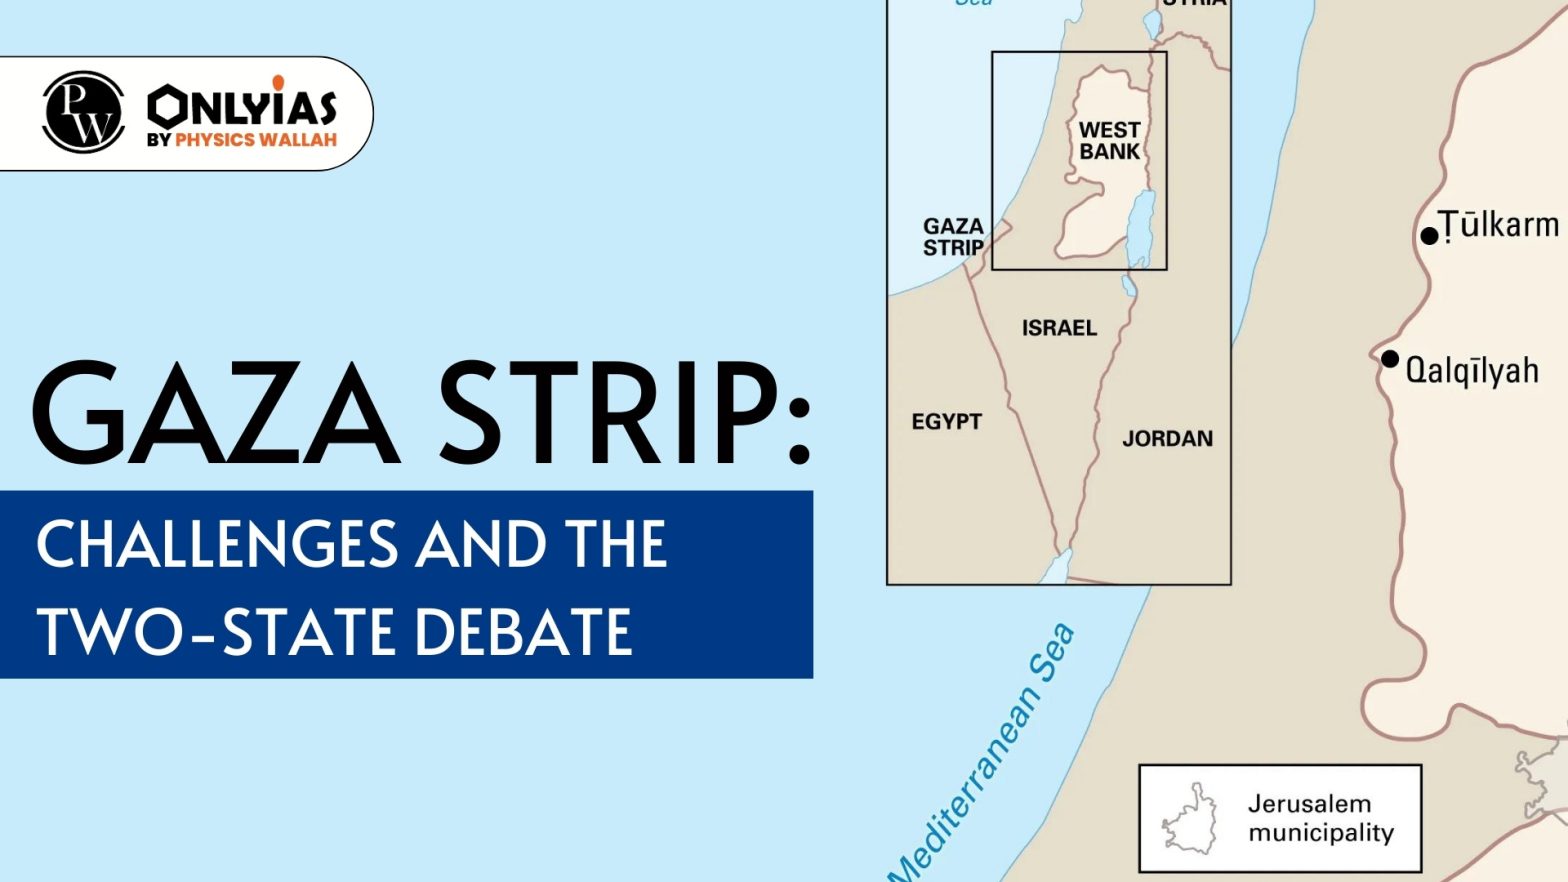 Gaza Strip: Challenges and the Two-State Debate